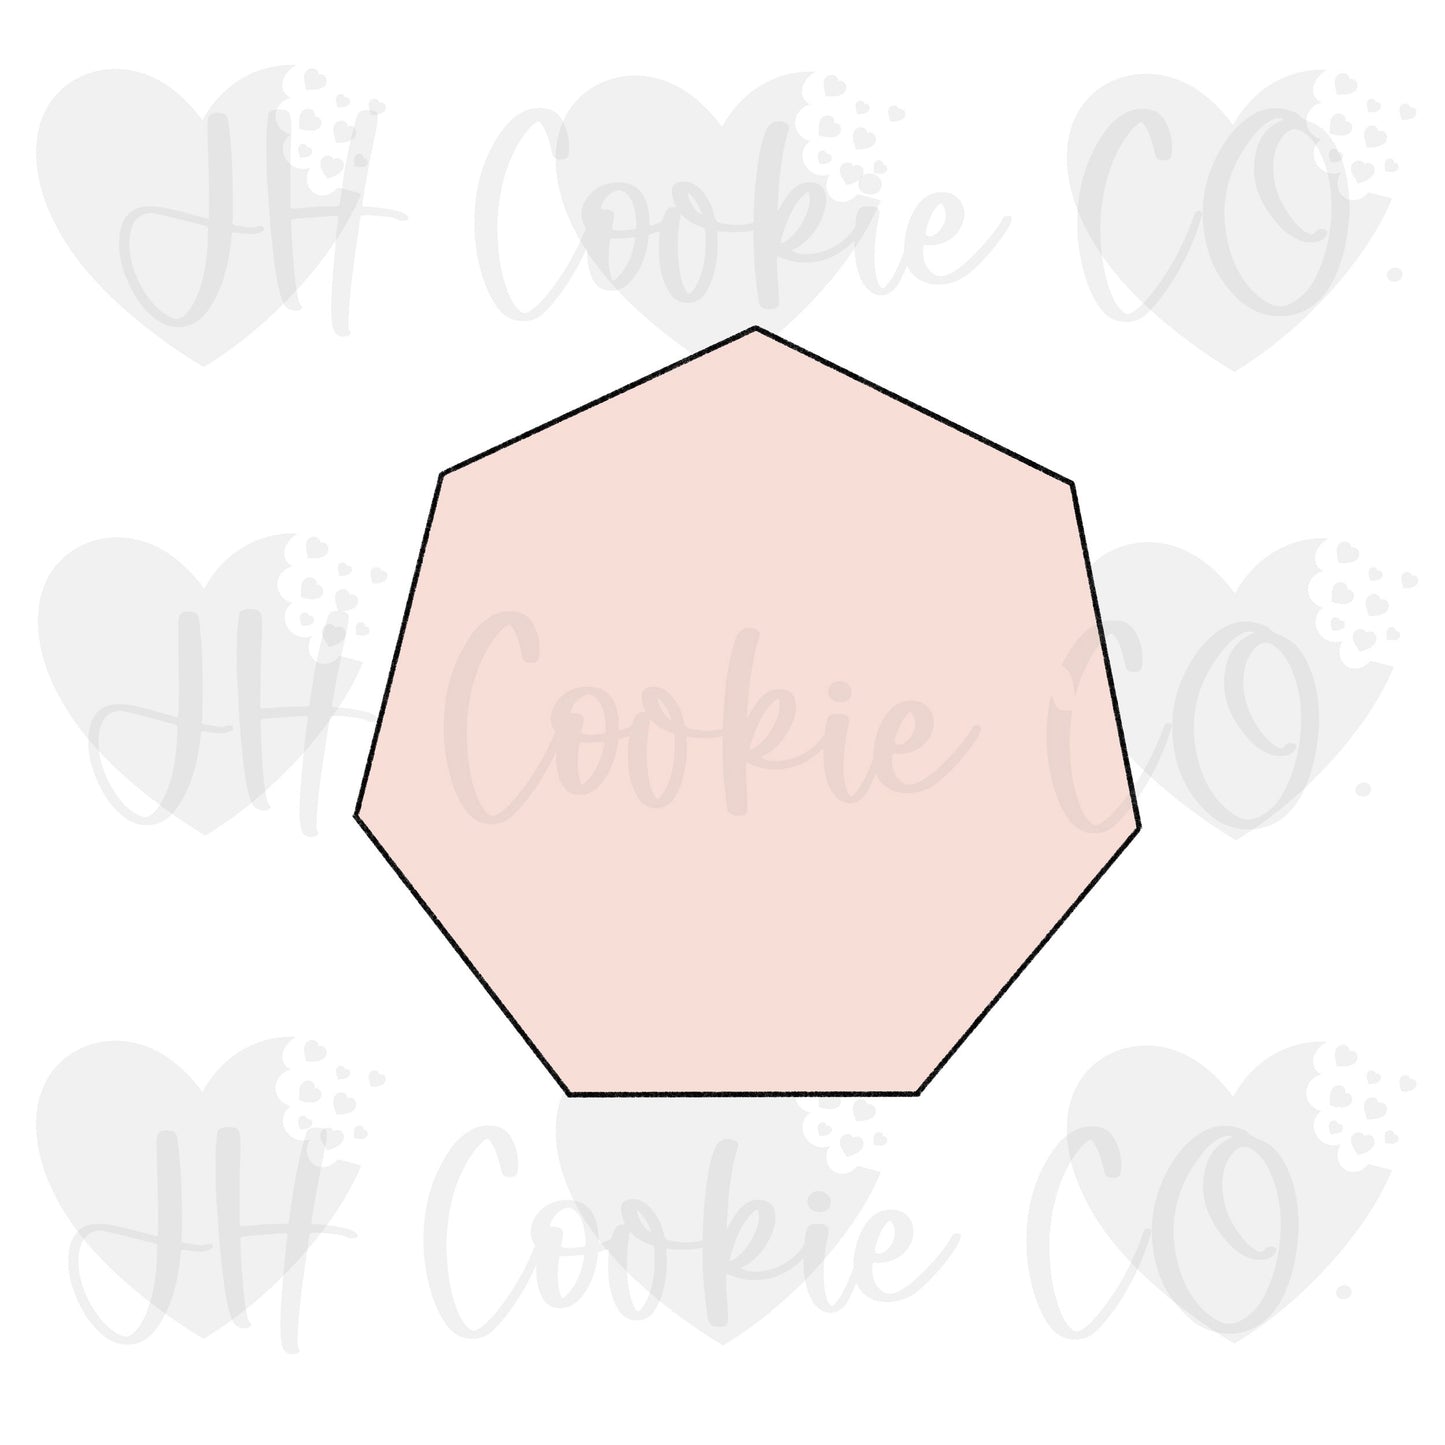 Heptagon (7 sided polygon) - Cookie Cutter